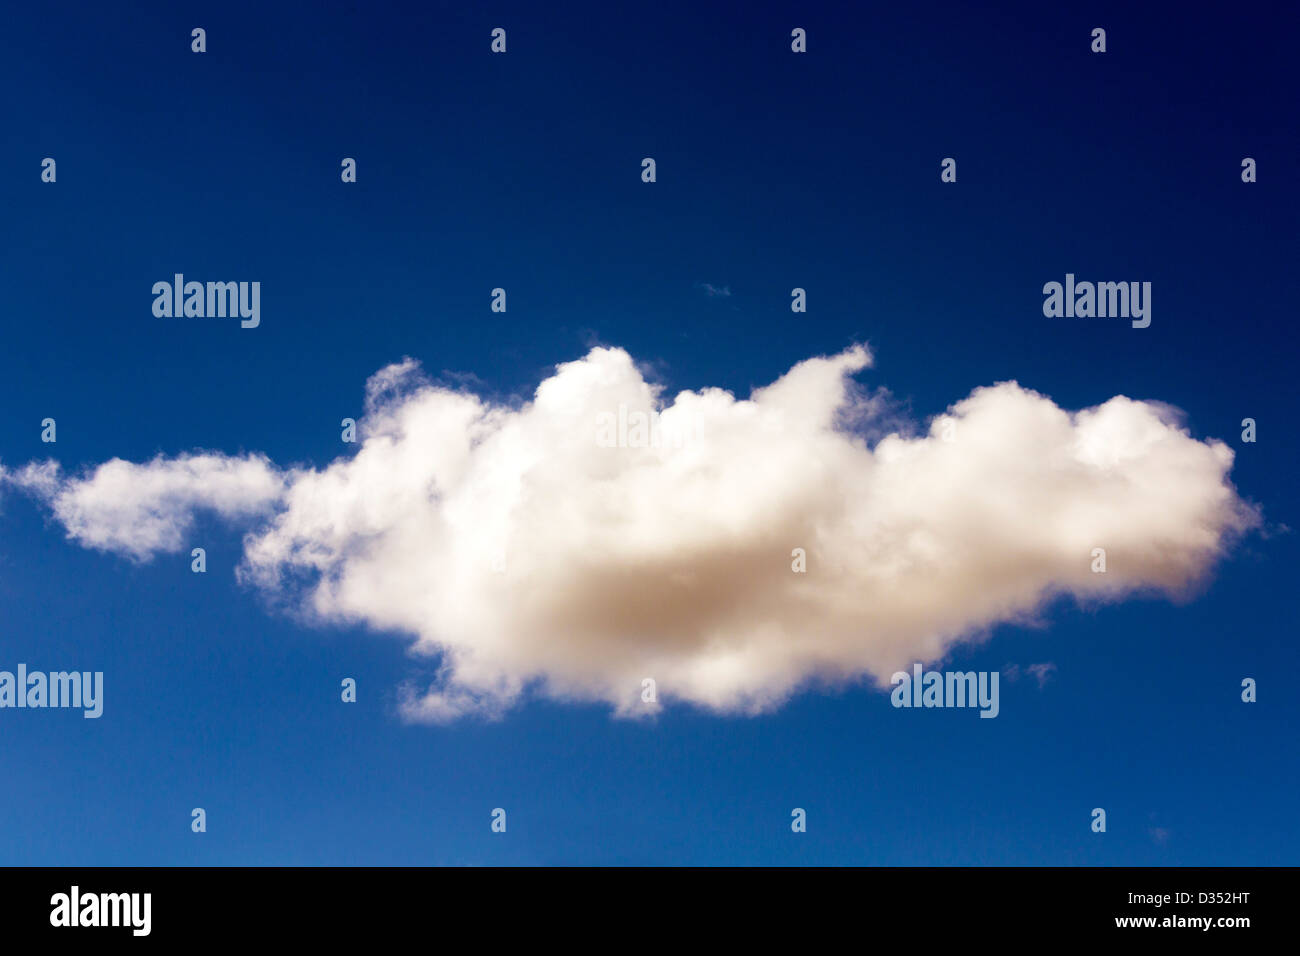 Cloud formation Stock Photo